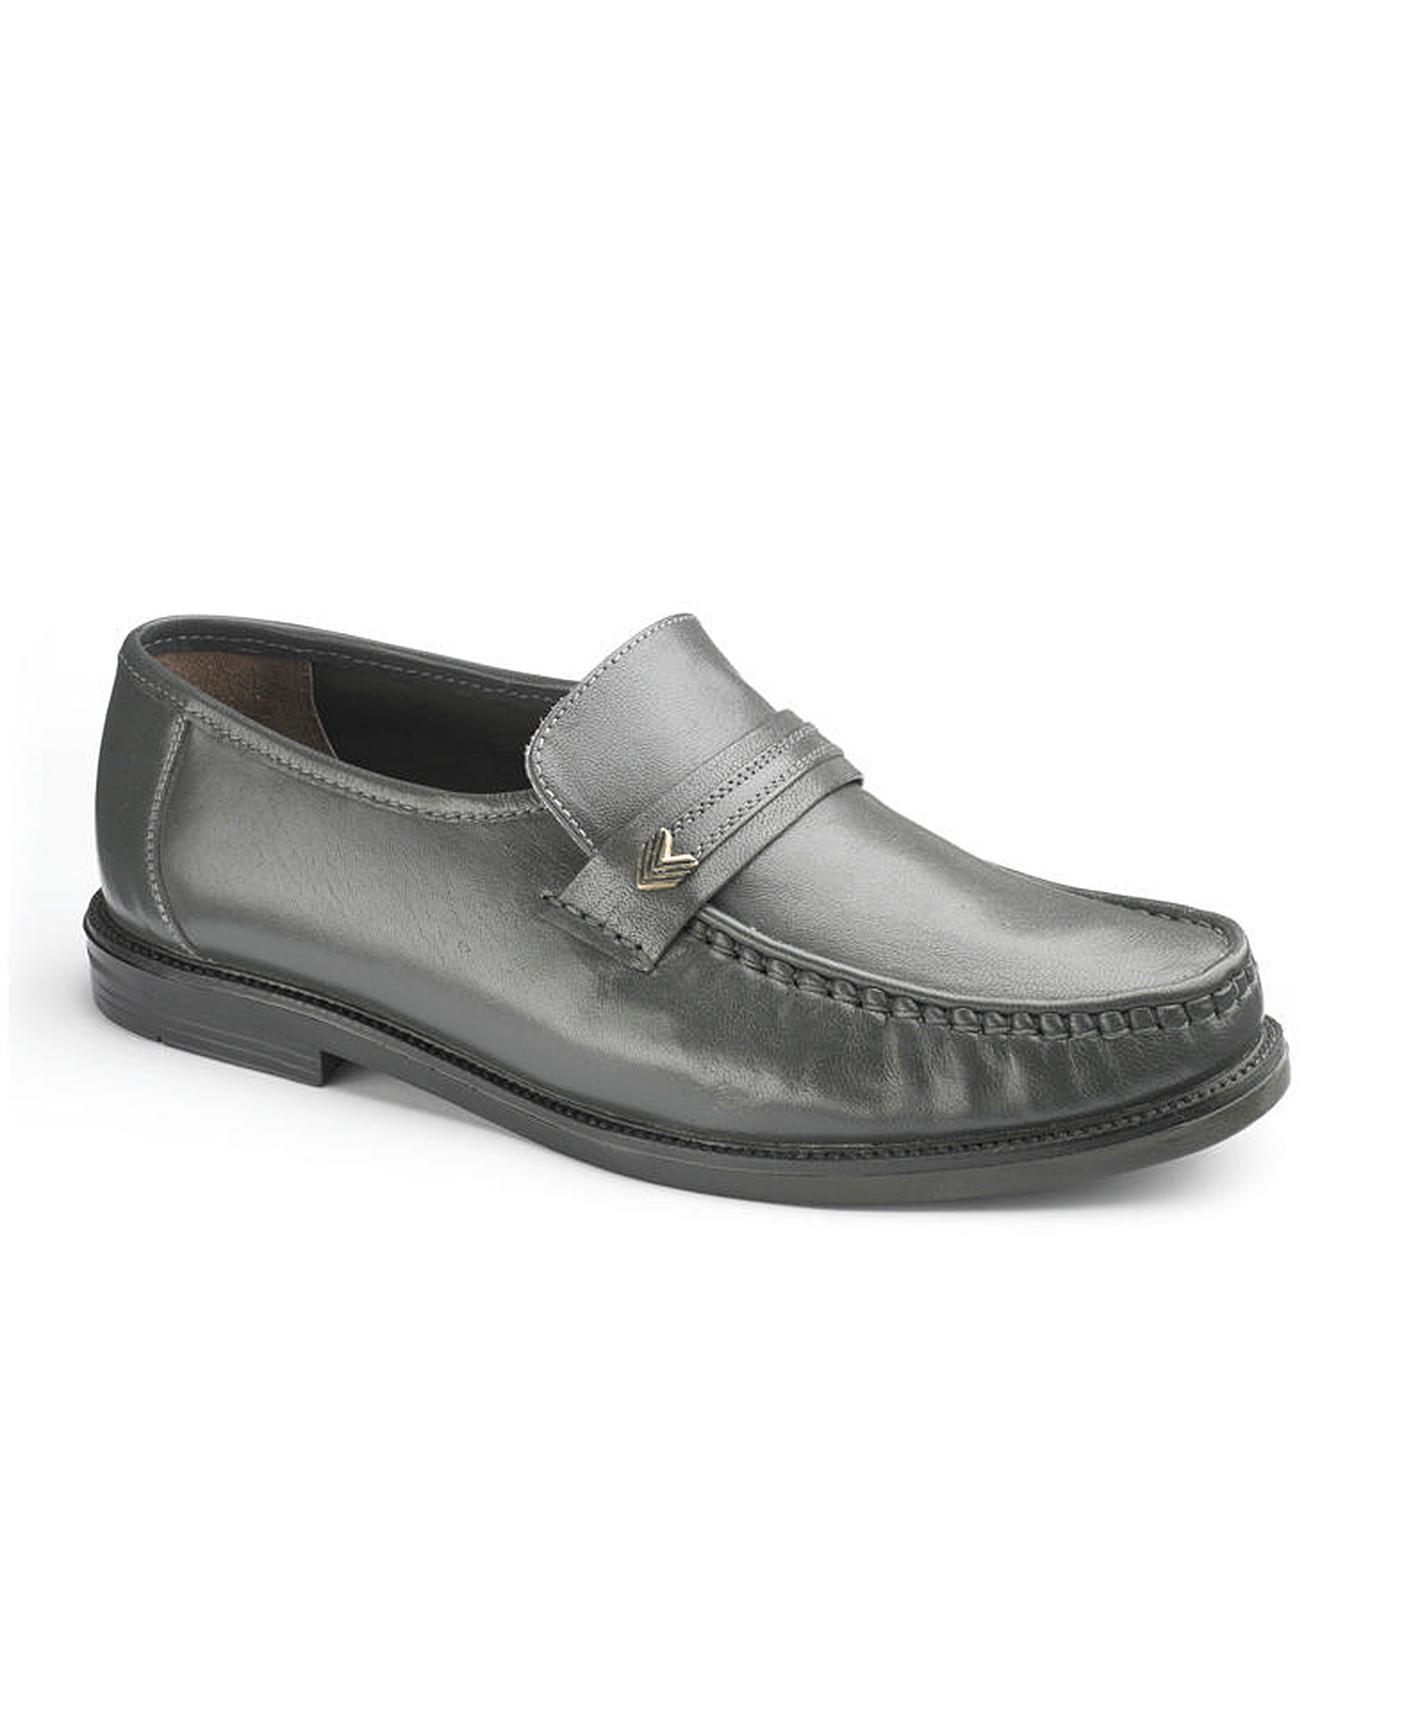 Trustyle Mens Slip-On Shoes Wide Fit